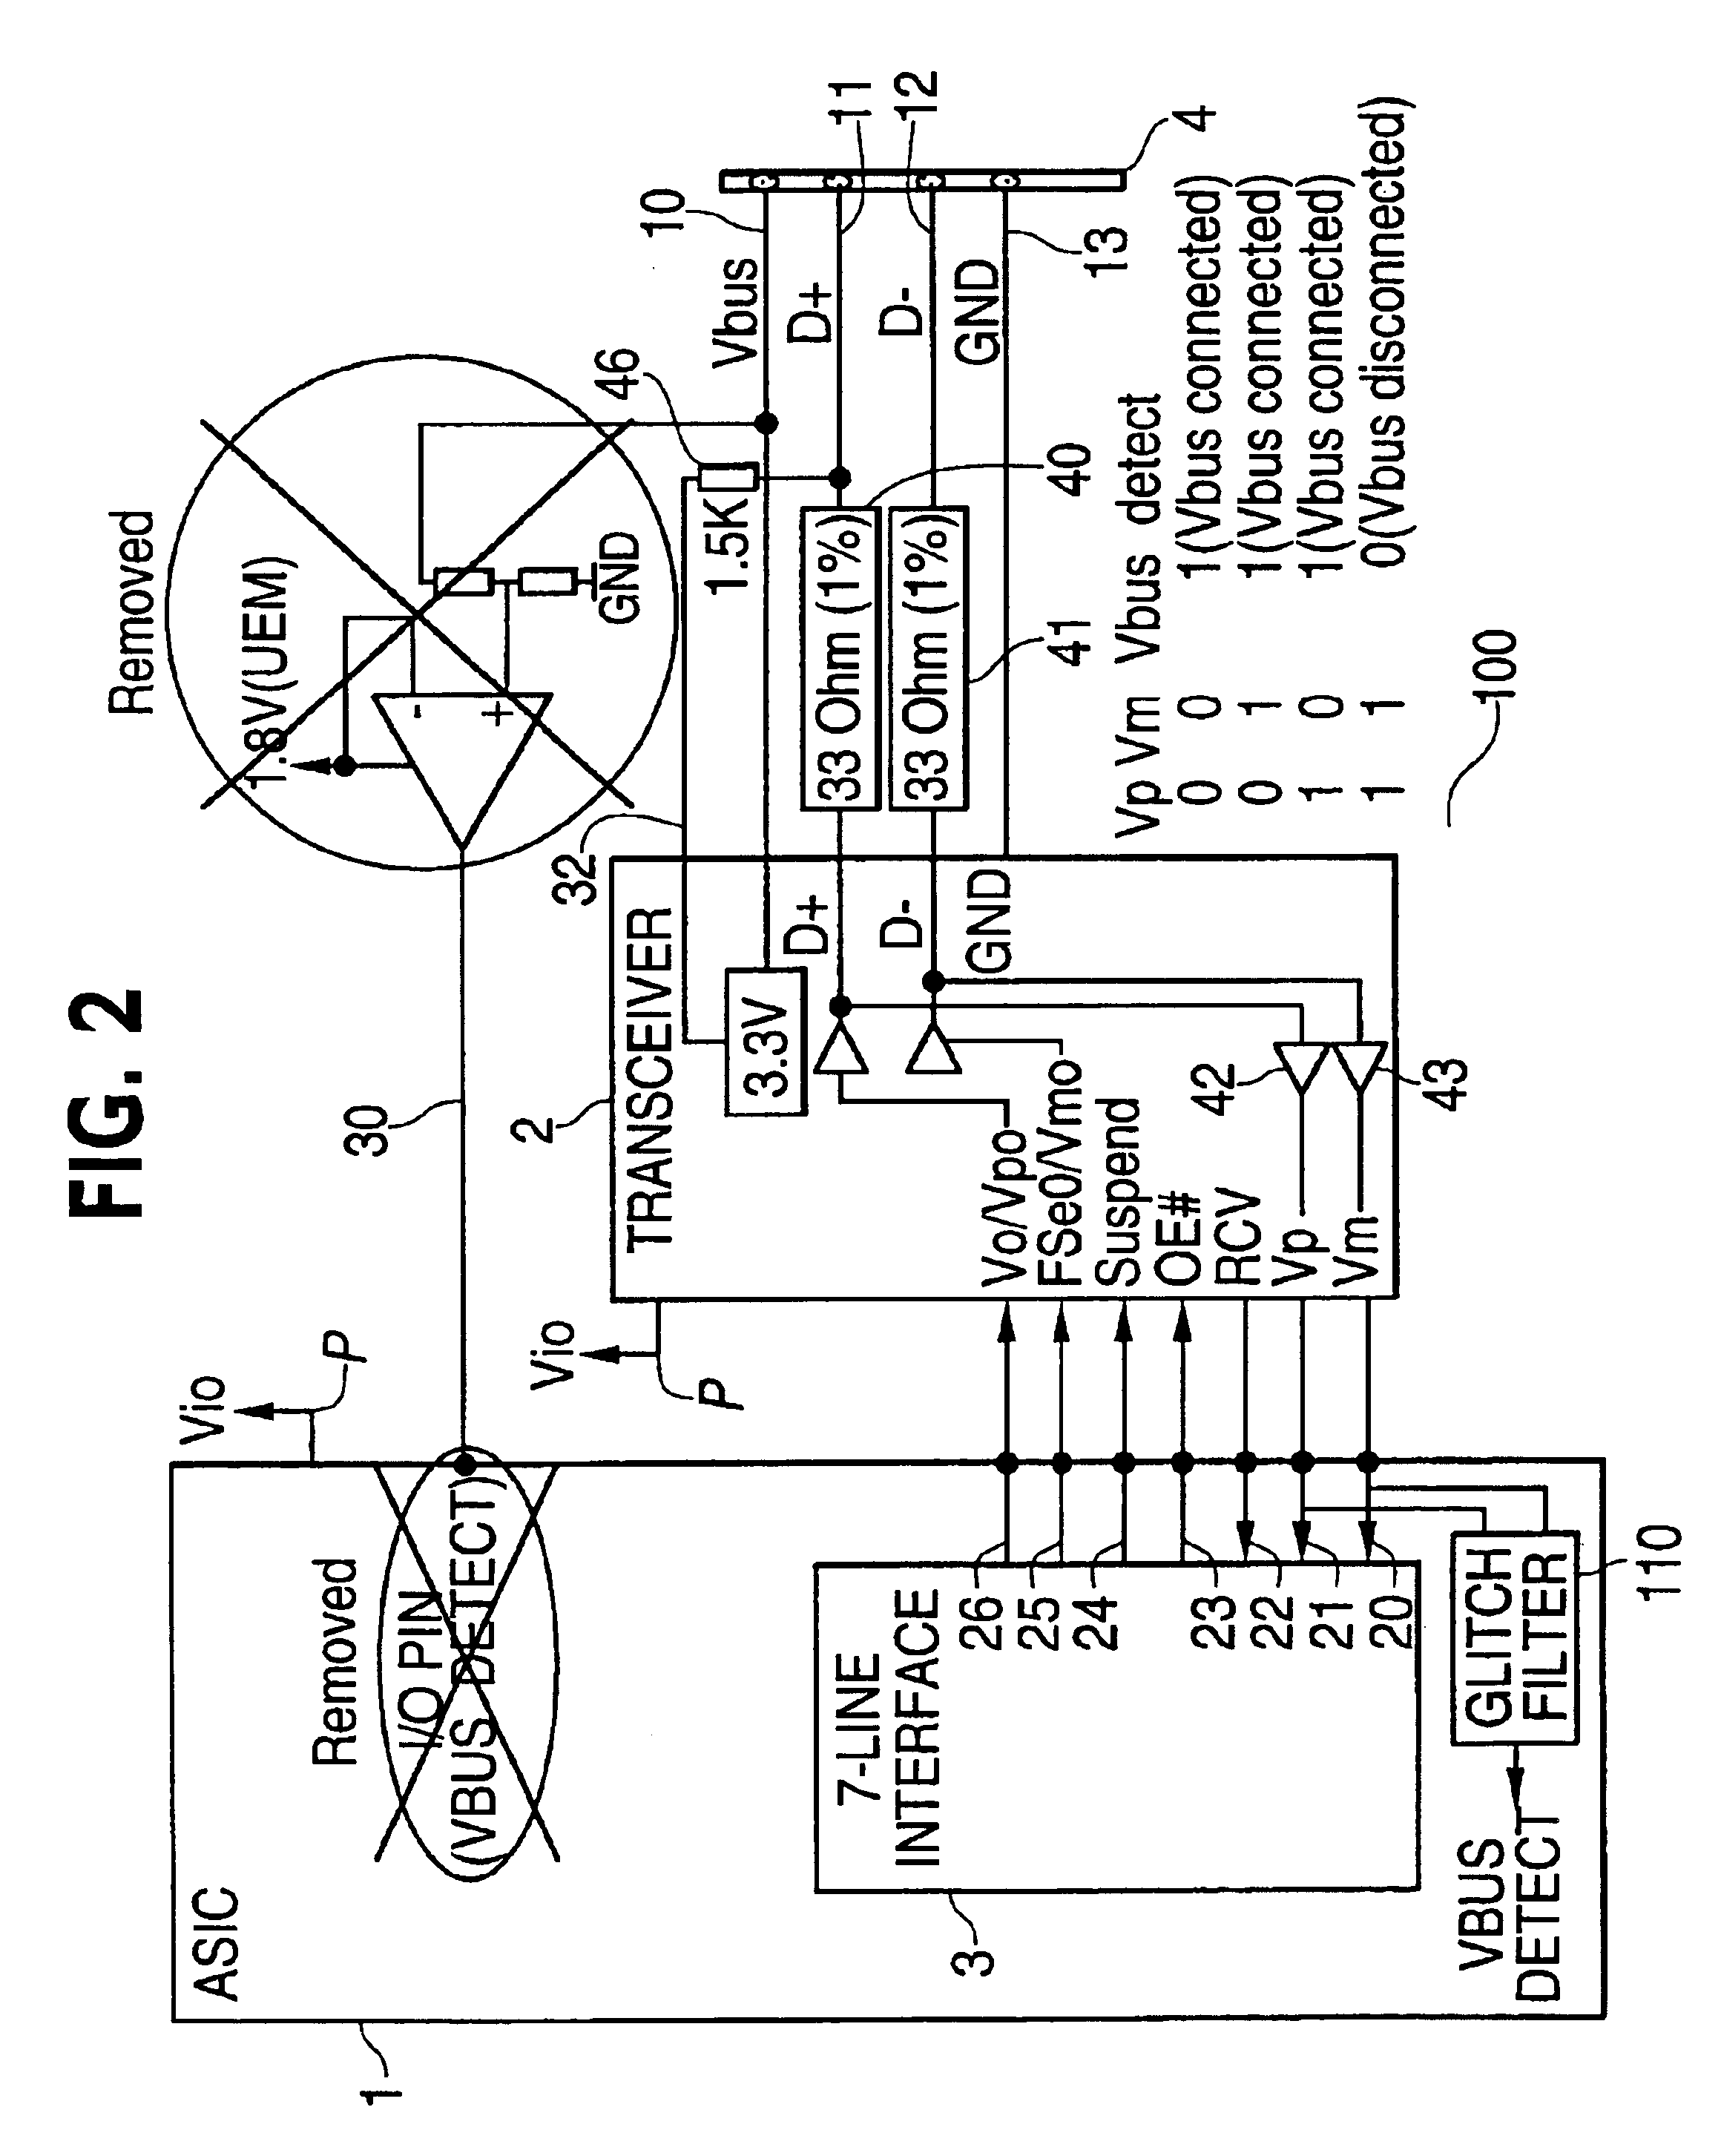 Universal Serial Bus circuit which detects connection status to a USB host